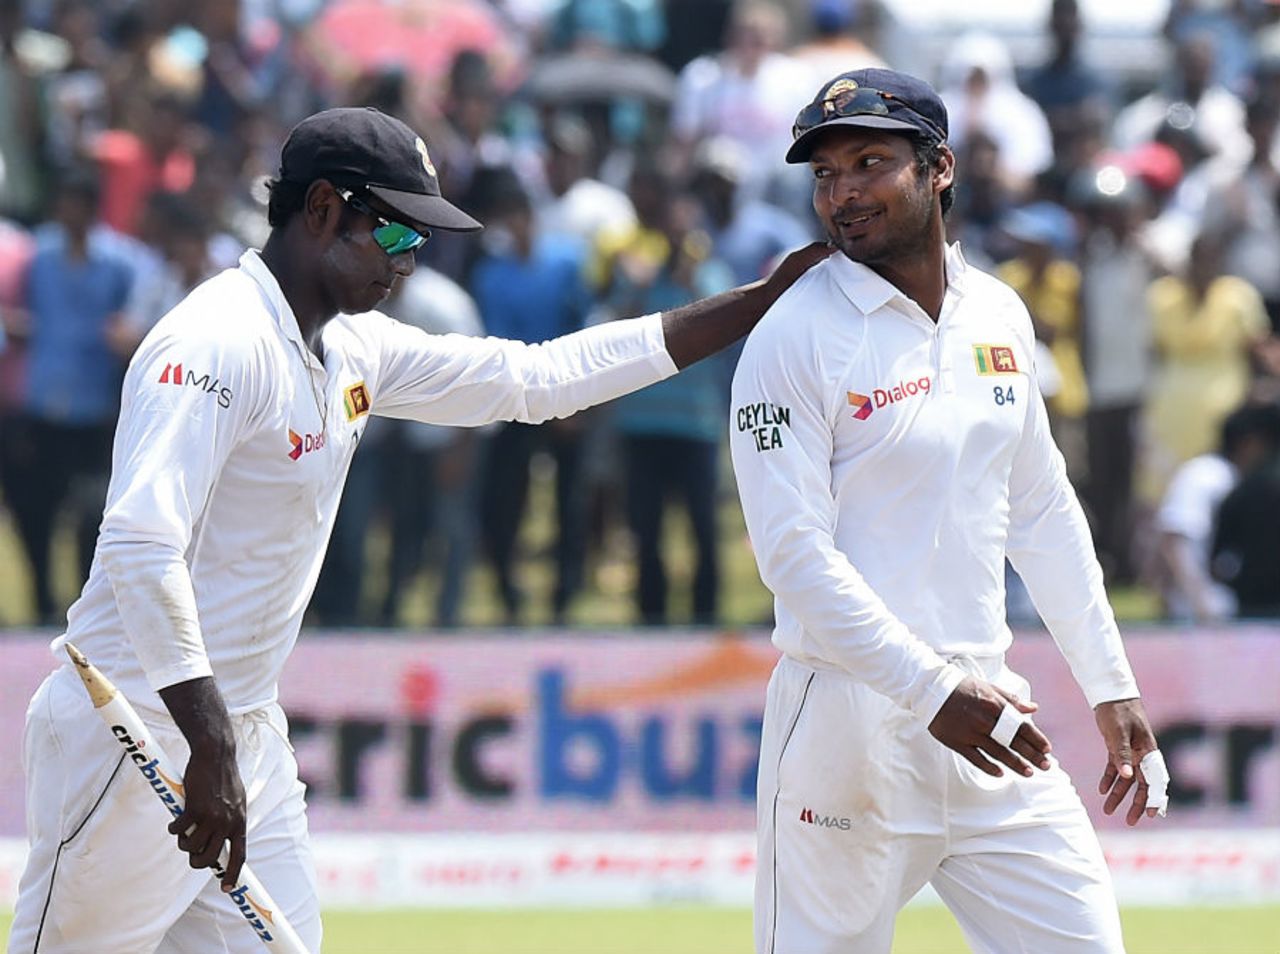 Well done mate: Kumar Sangakkara gets a pat on the back from Angelo Mathews, Sri Lanka v India, 1st Test, Galle, 4th day, August 15, 2015